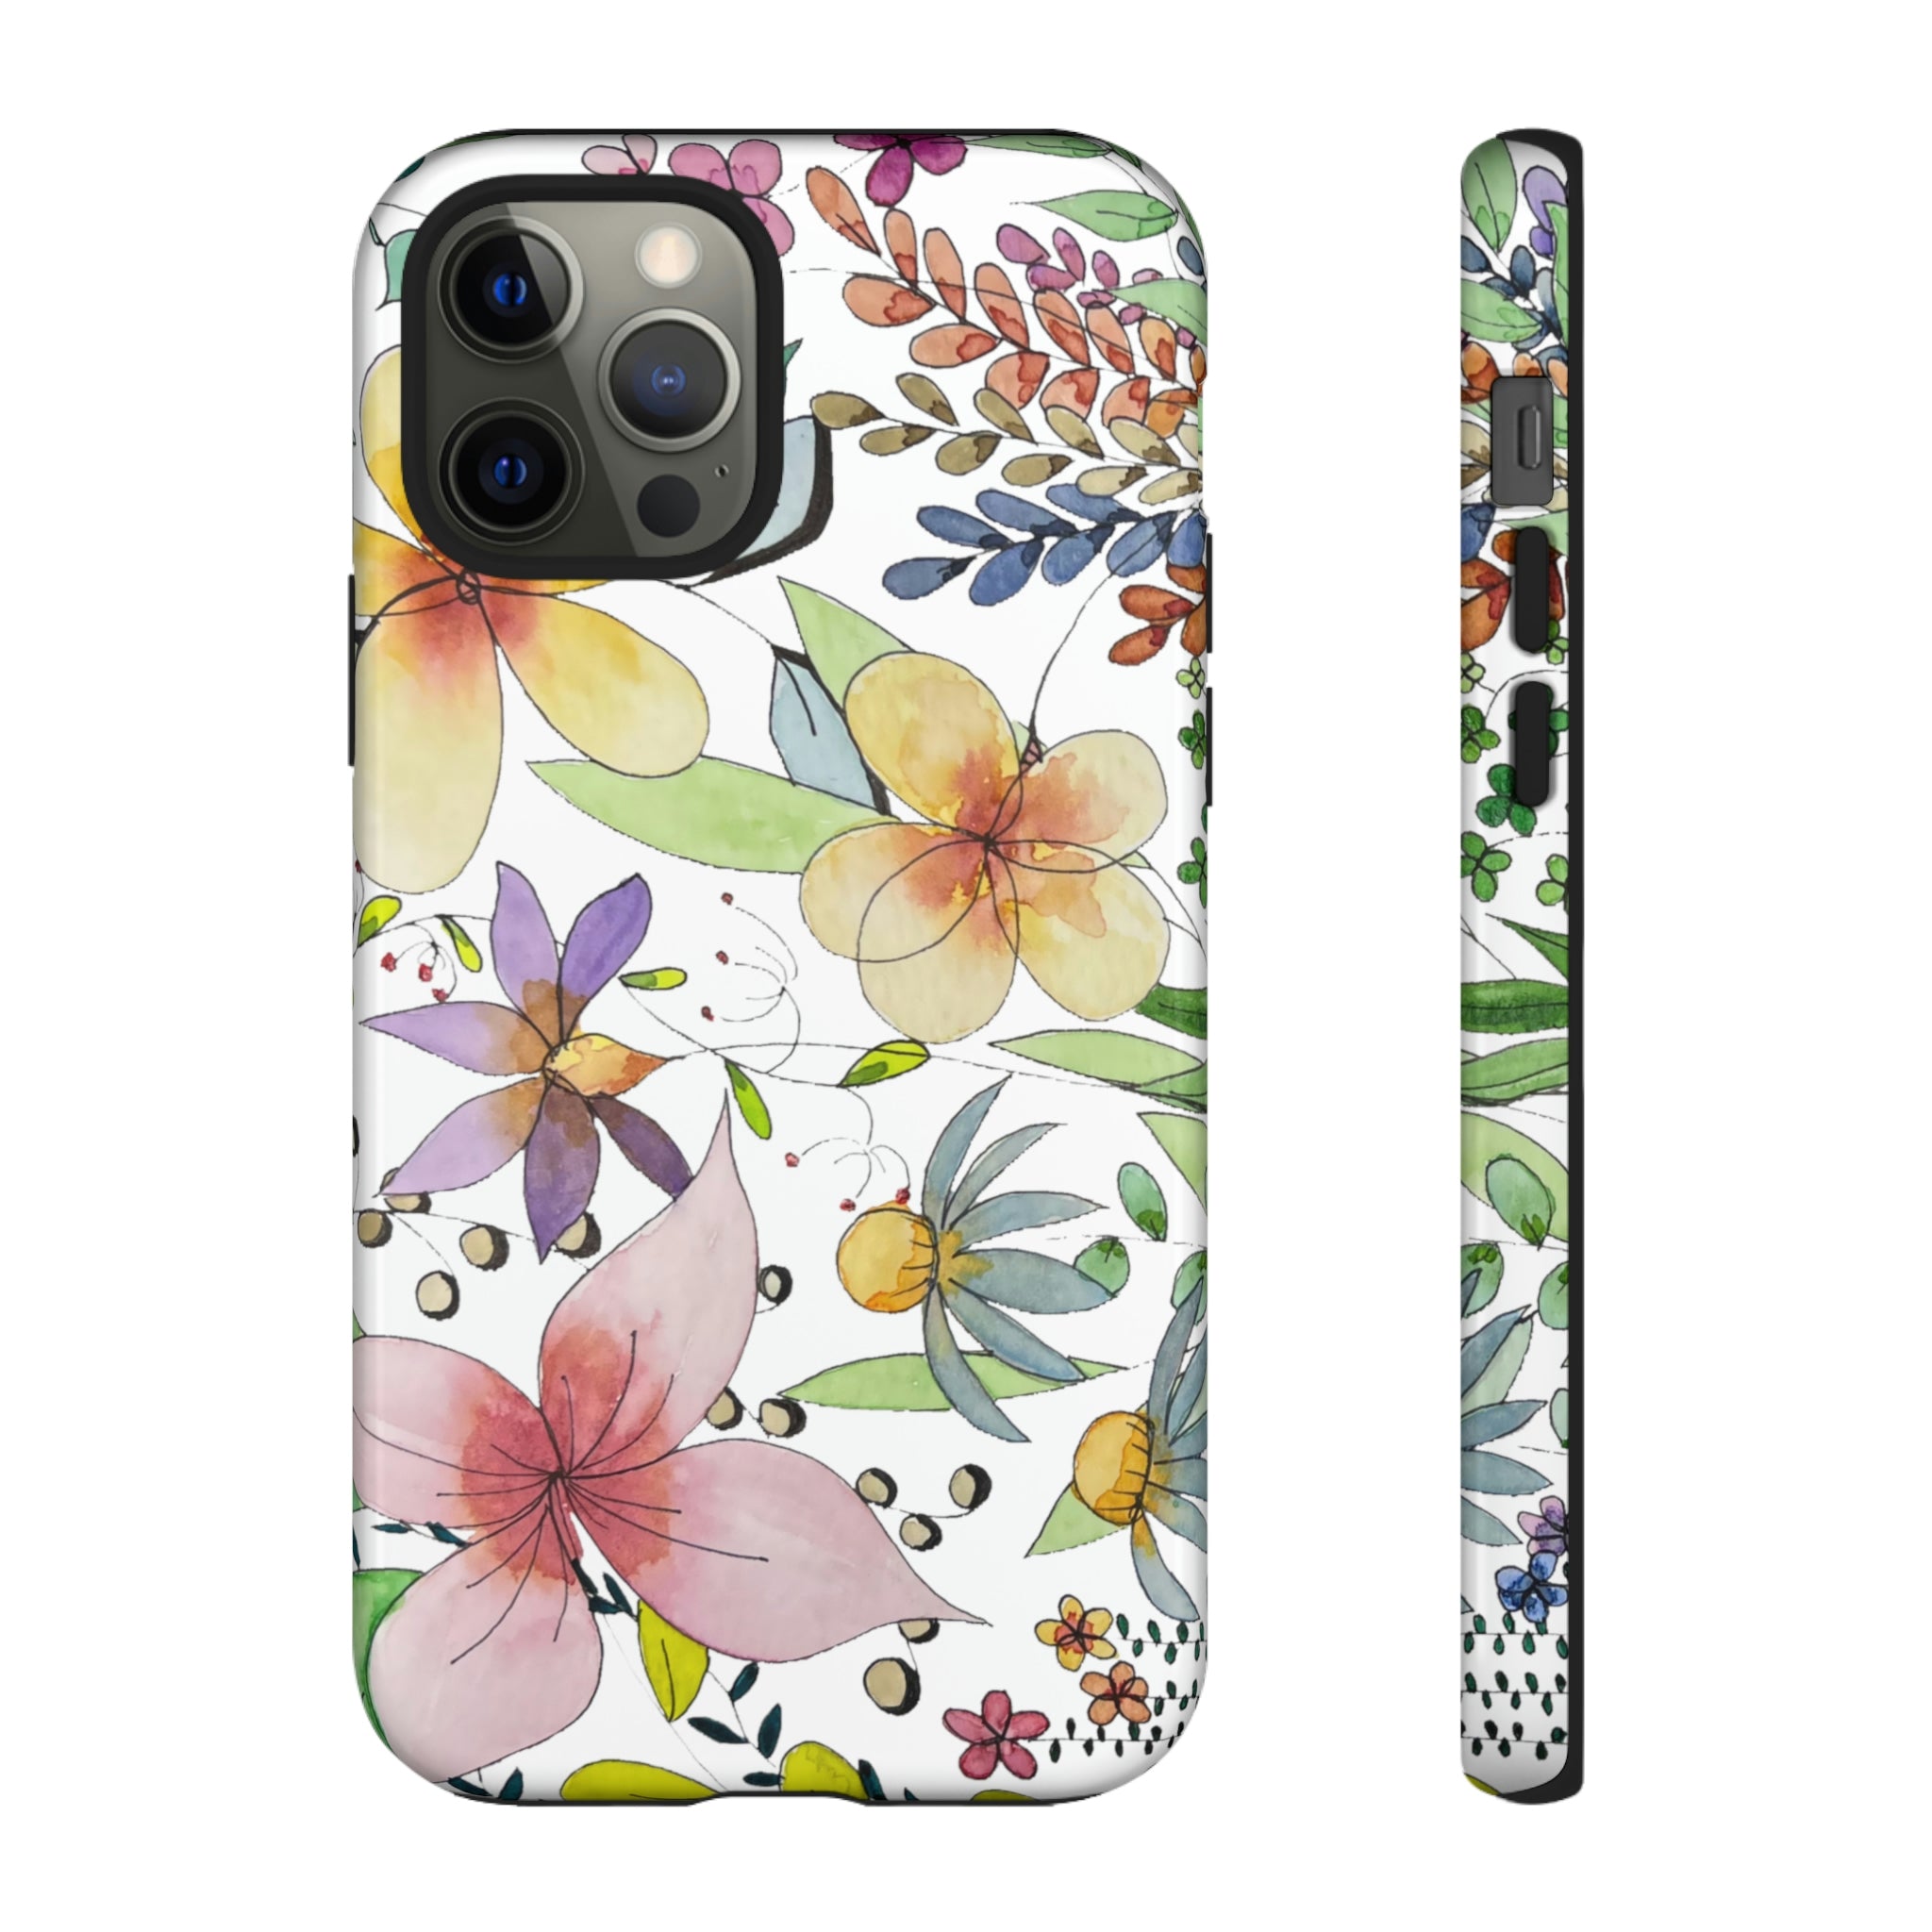 Coloring Garden Botanical Print on Cell Phone Cases | iPhone, Google Pixel, and Samsung Galaxy